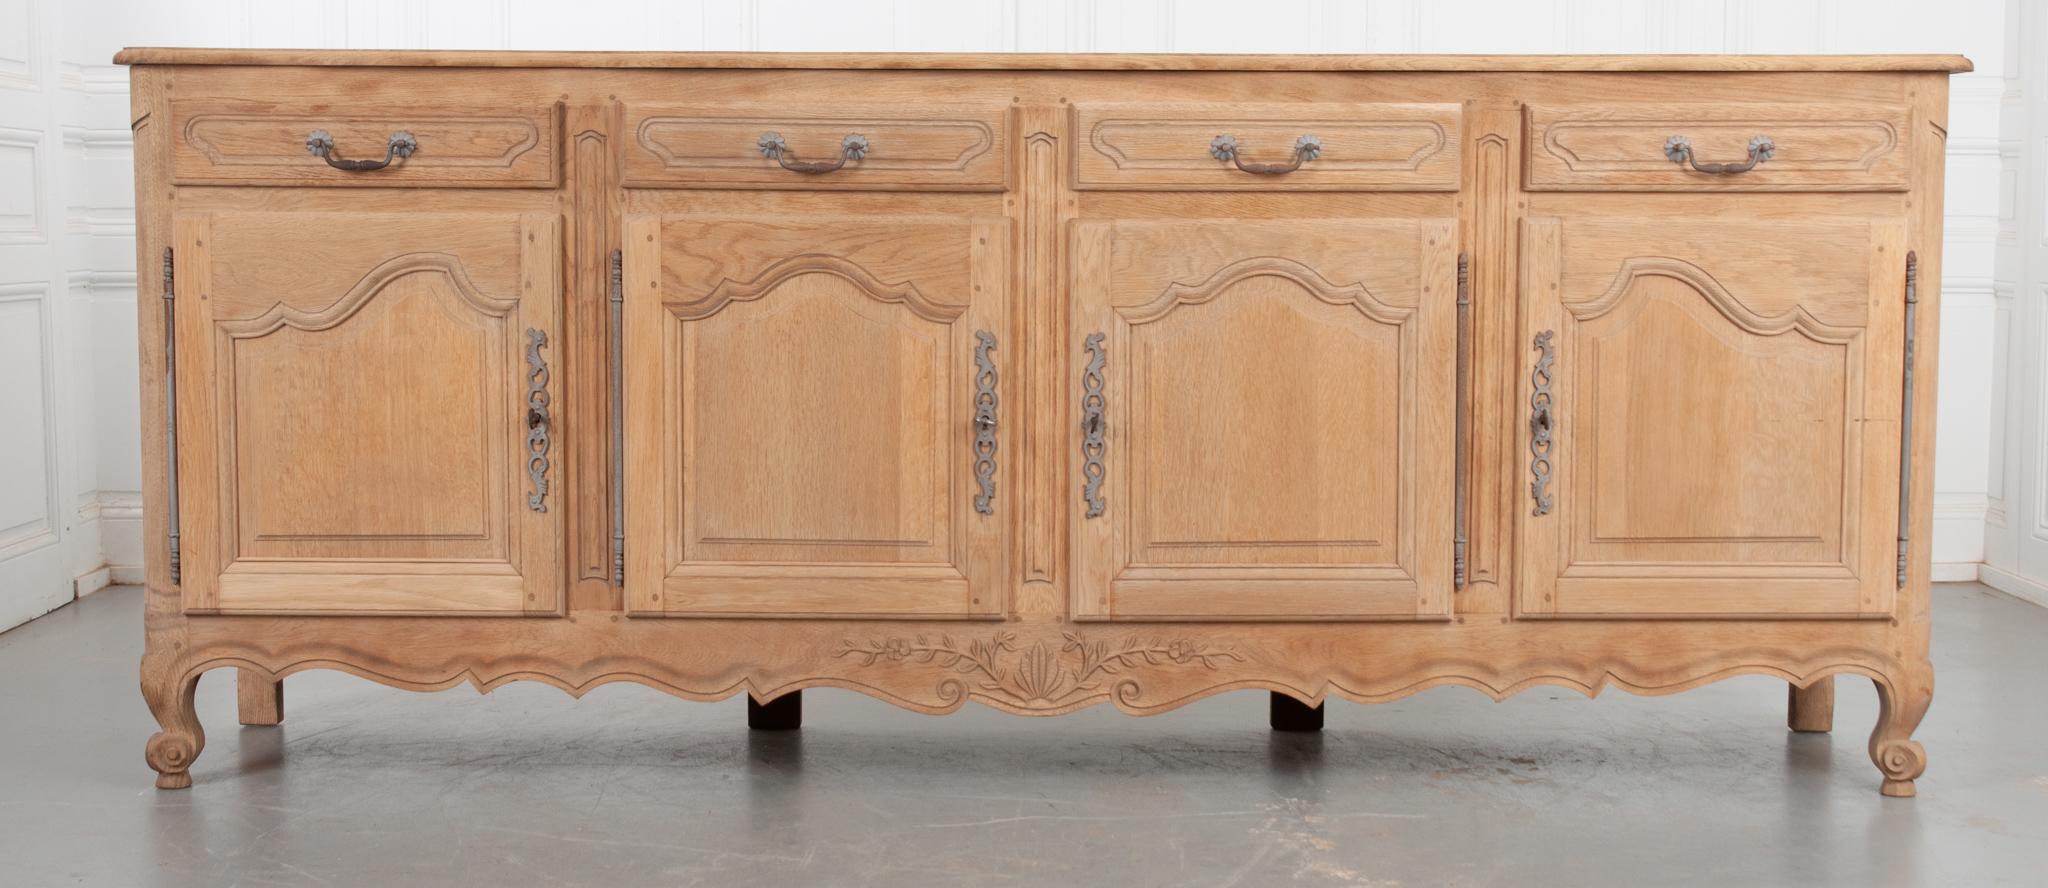 This vintage enfilade was made in the 1940’s in the style of Louis XV of France. The sturdy oak has been sandblasted, giving it a unique finish. Beautiful details throughout this piece include a wonderful top with parquet design and scalloped edge,